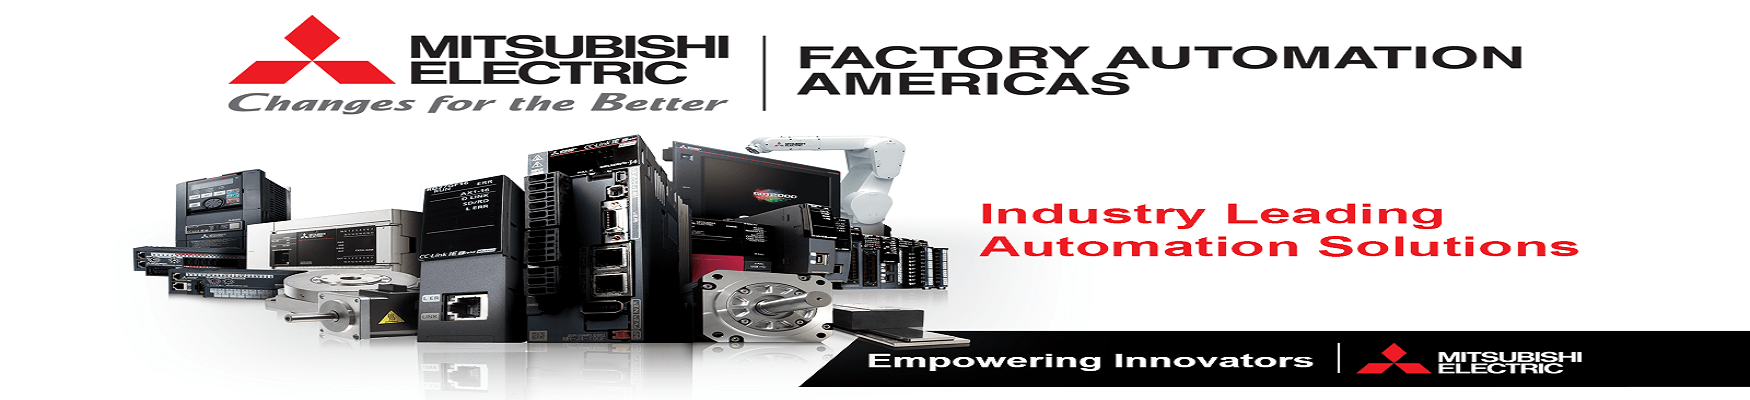 FACTORY_AUTOMATION1600x800